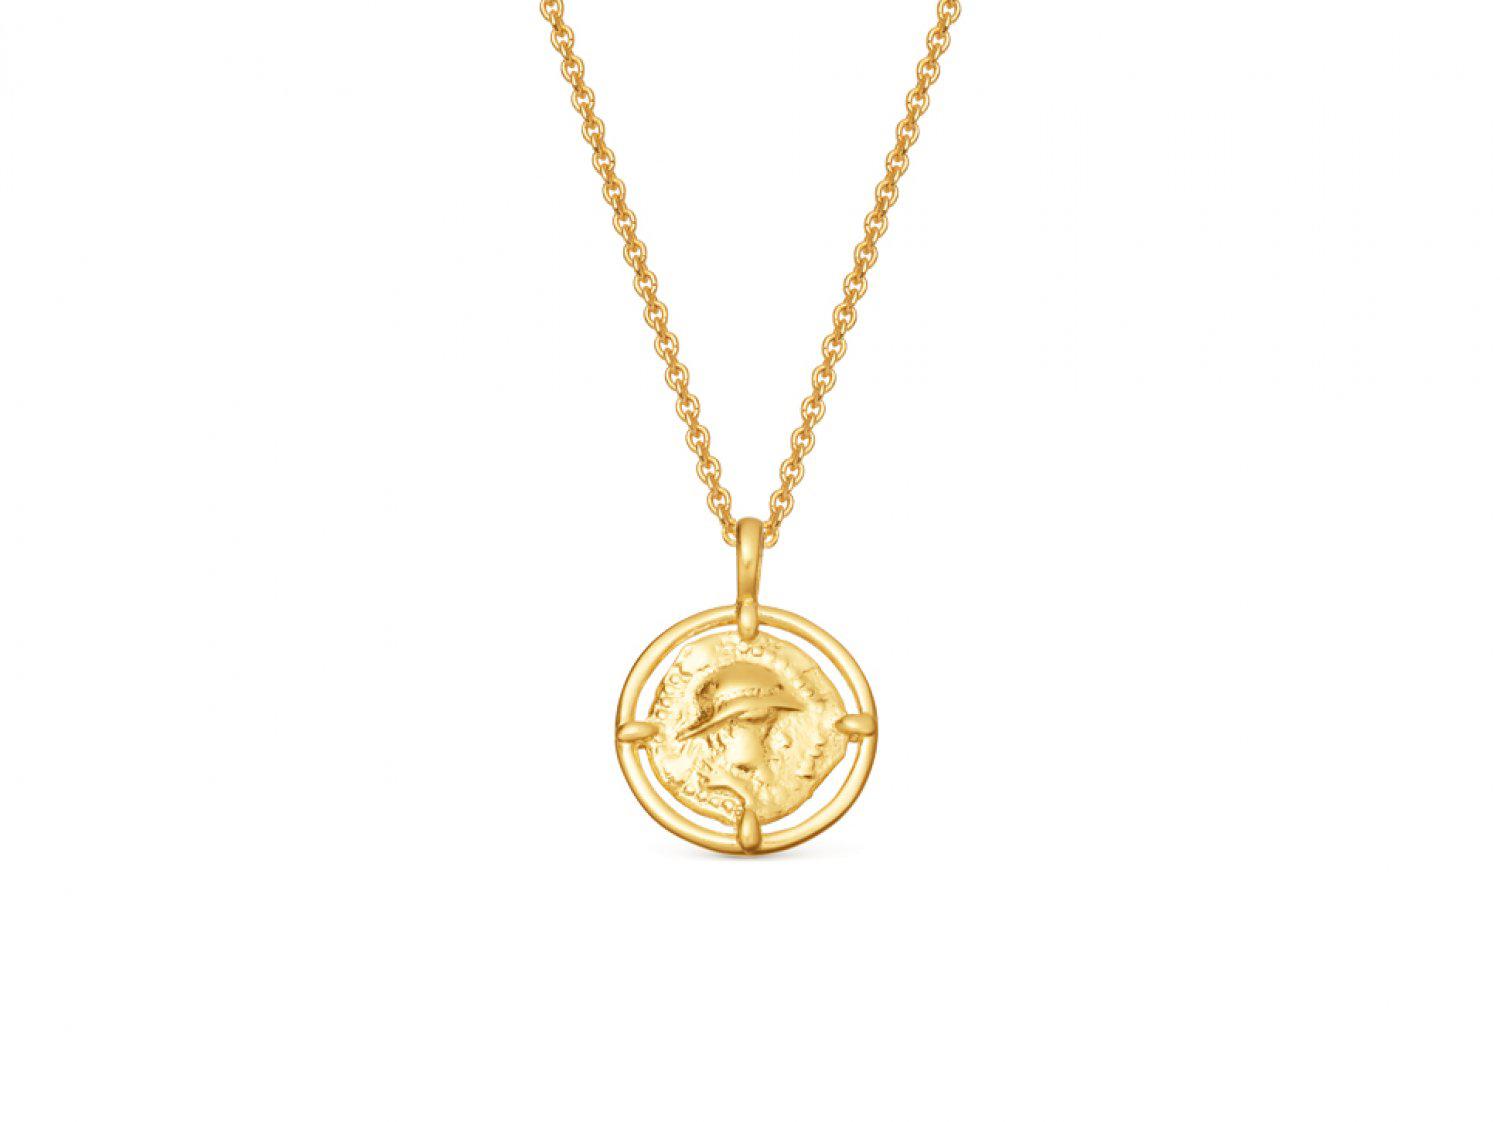 Missoma Lucy Williams X Mini Rope Coin Necklace in Metallic - Lyst